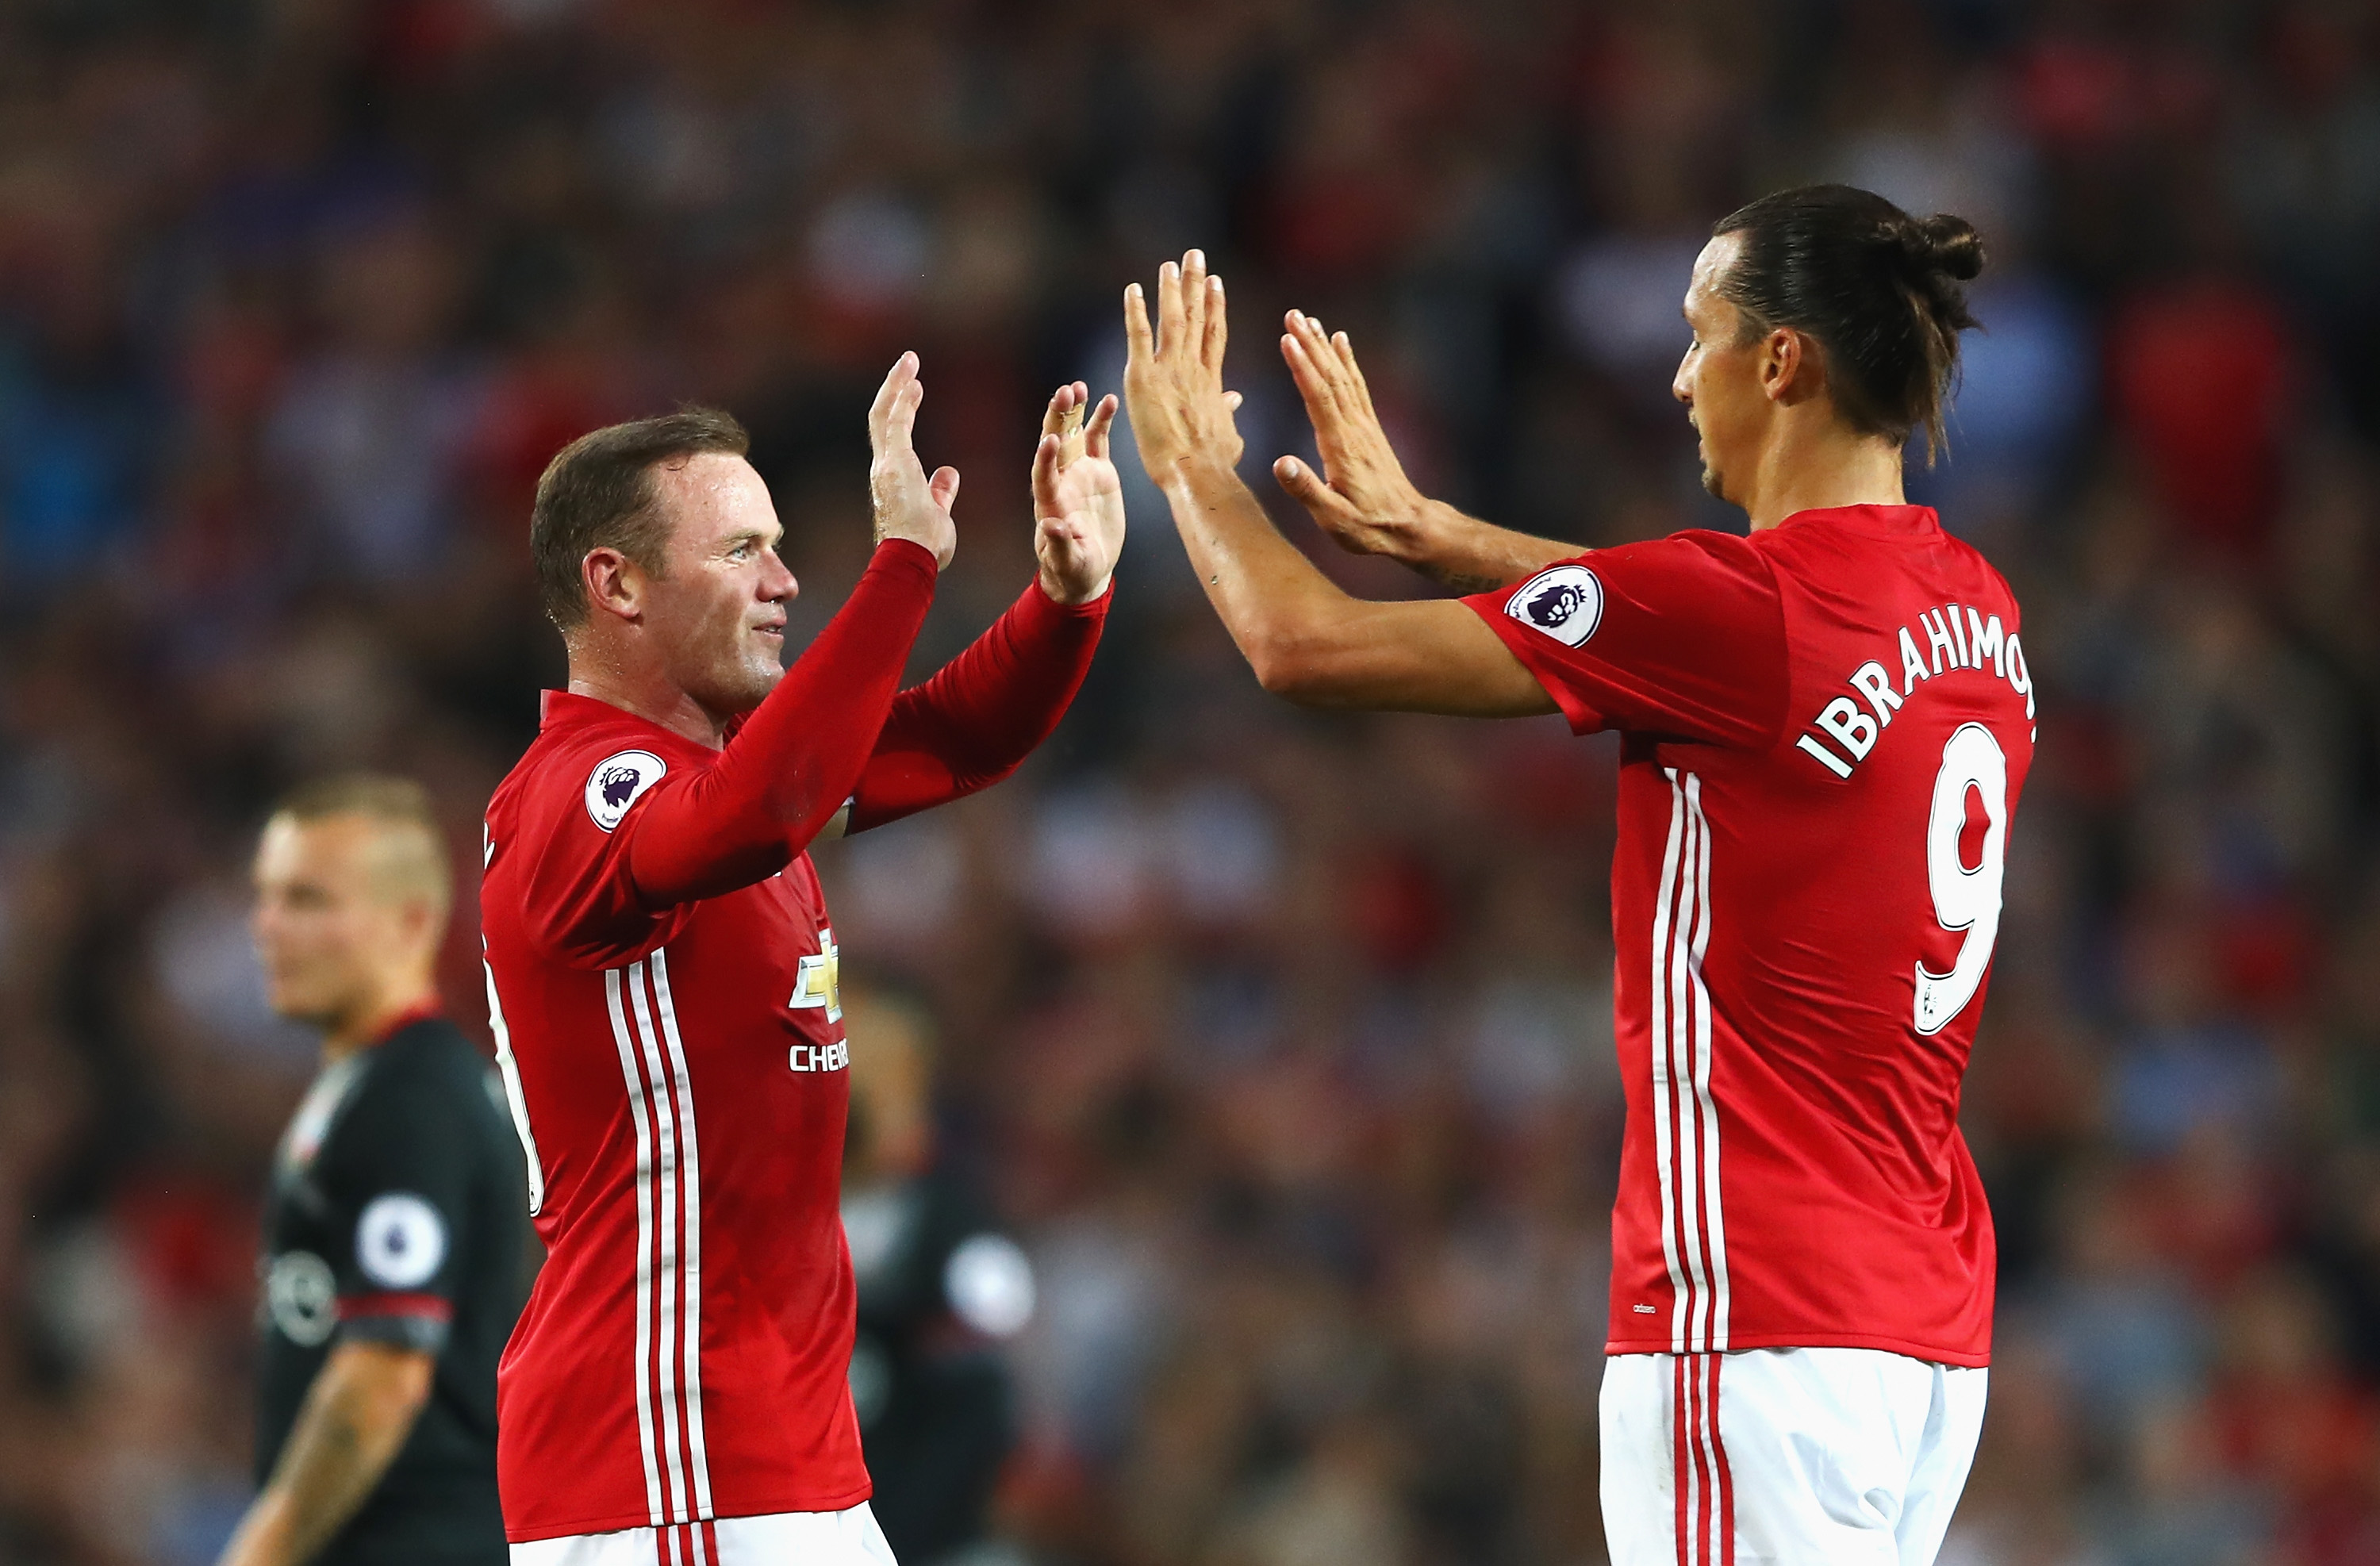 Zlatan and Rooney would need to swap places at times according to Mourinho's tactics to partner Rashford. (Picture Courtesy - AFP/Getty Images)